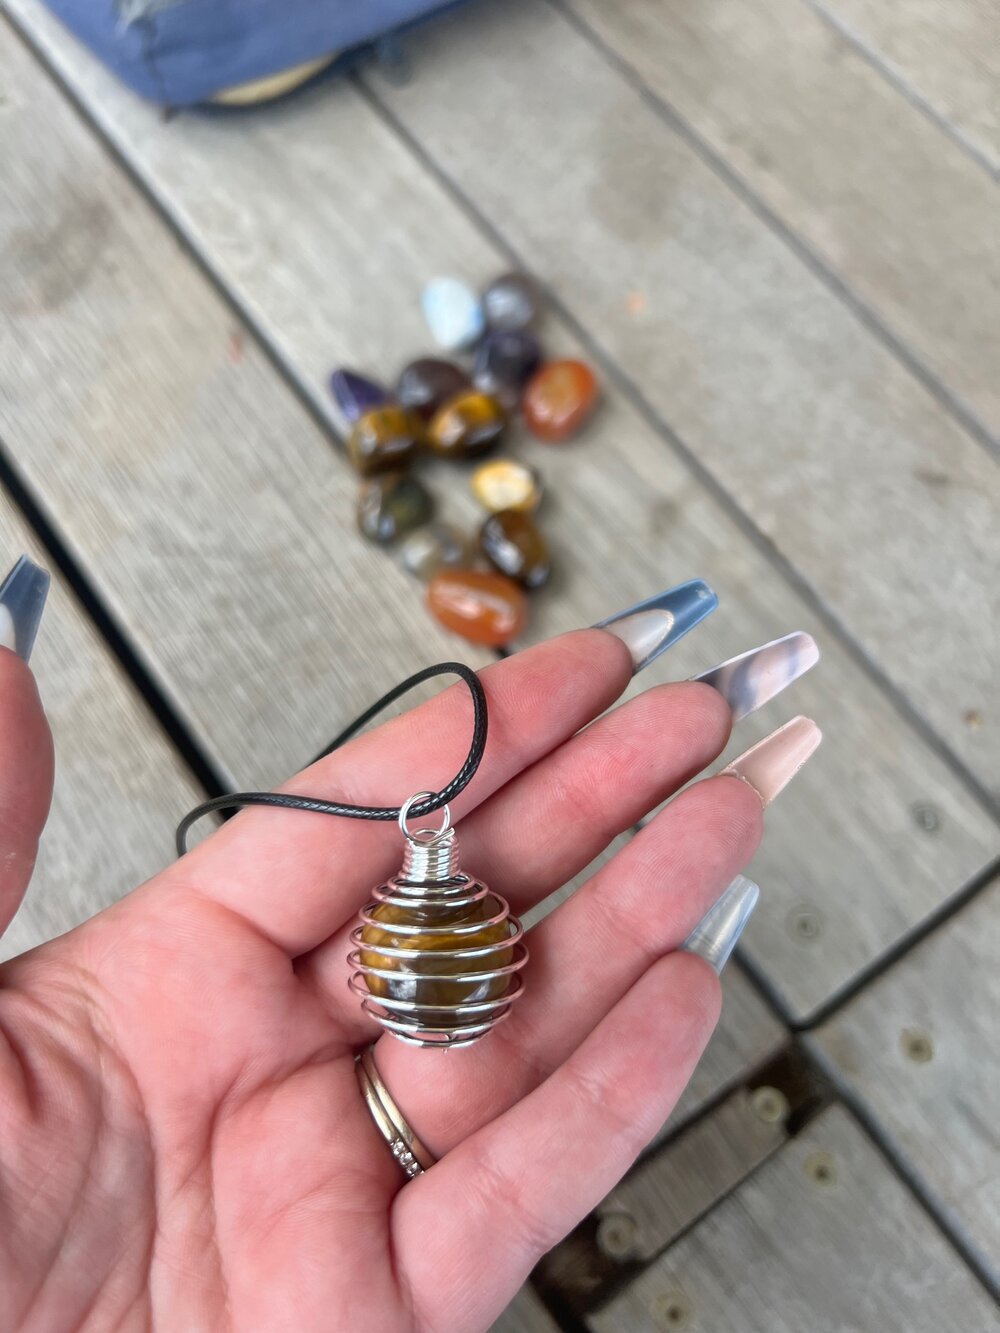 Crystal Cage Pendant, Ethical Crystals, Ascension Jewelry and Energy Tools